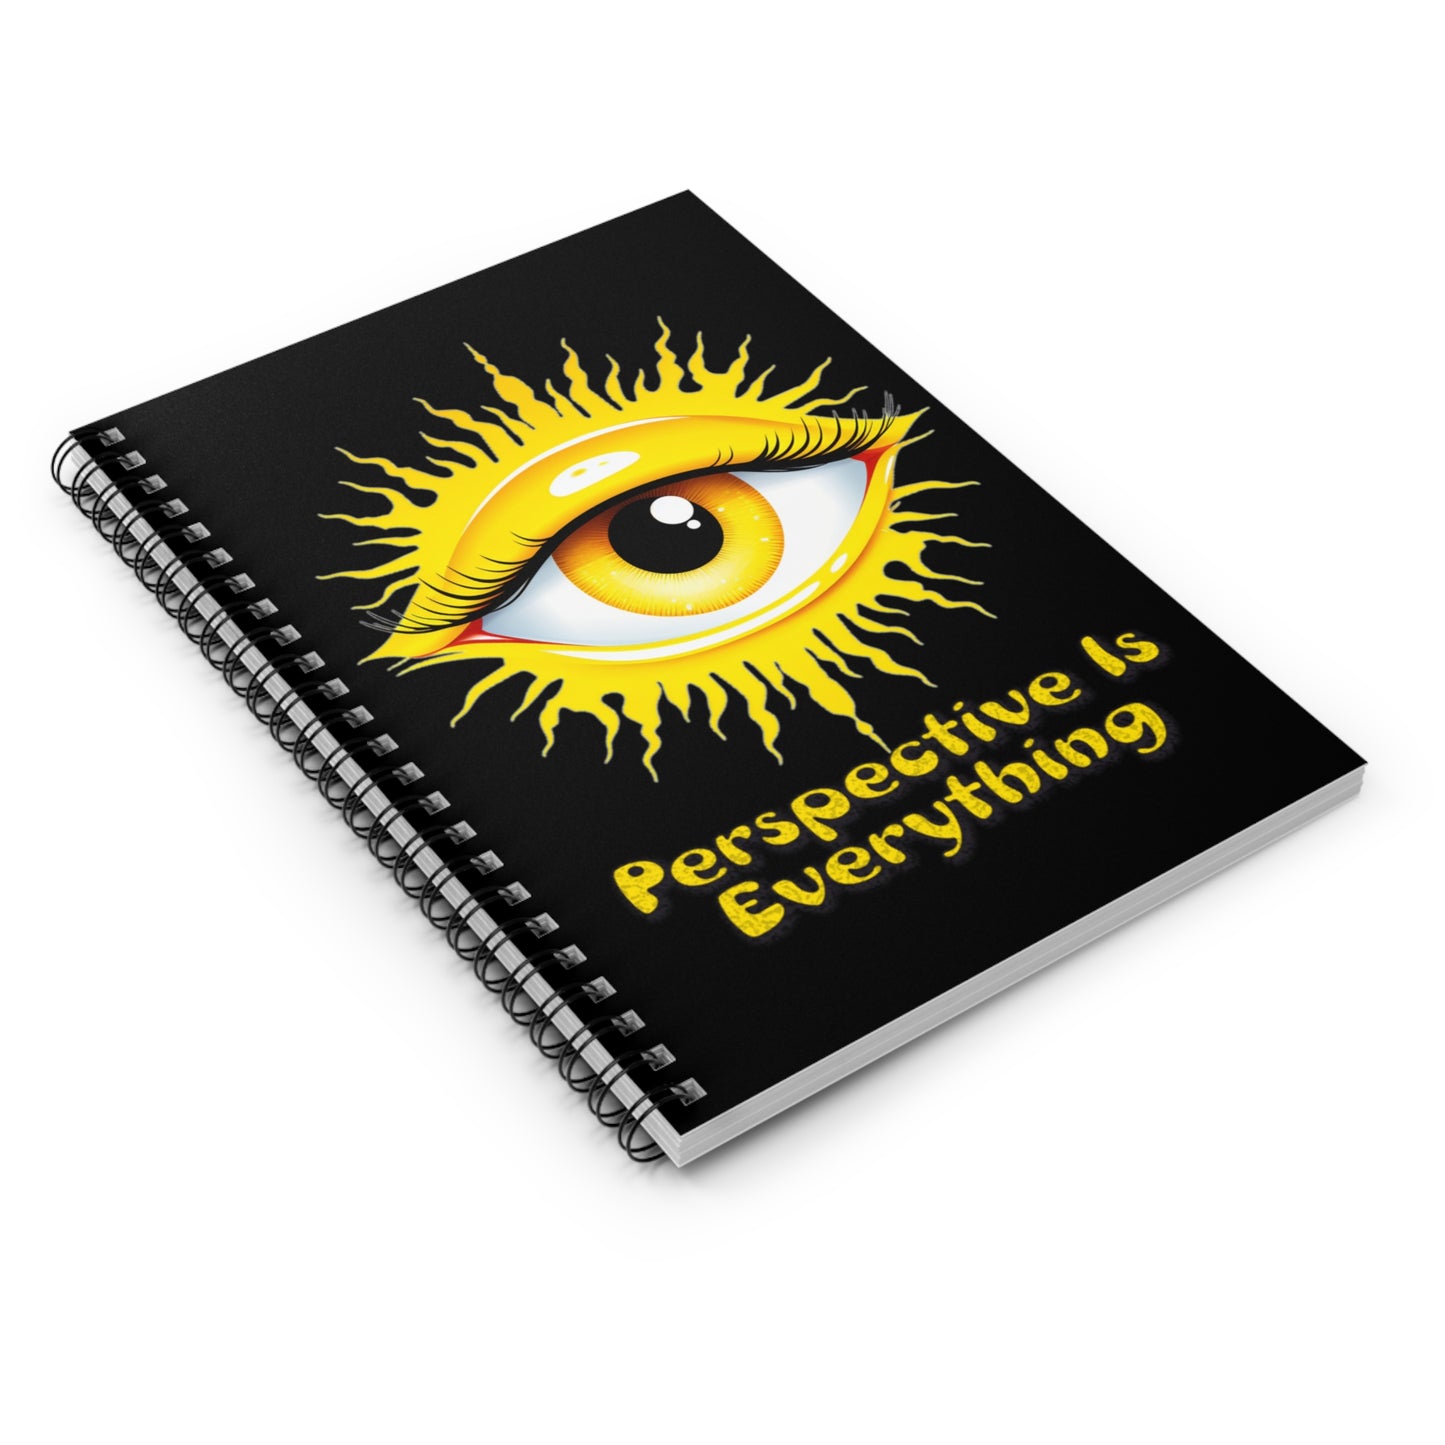 Perspective is Everything: Yellow | Spiral Notebook - Ruled Line